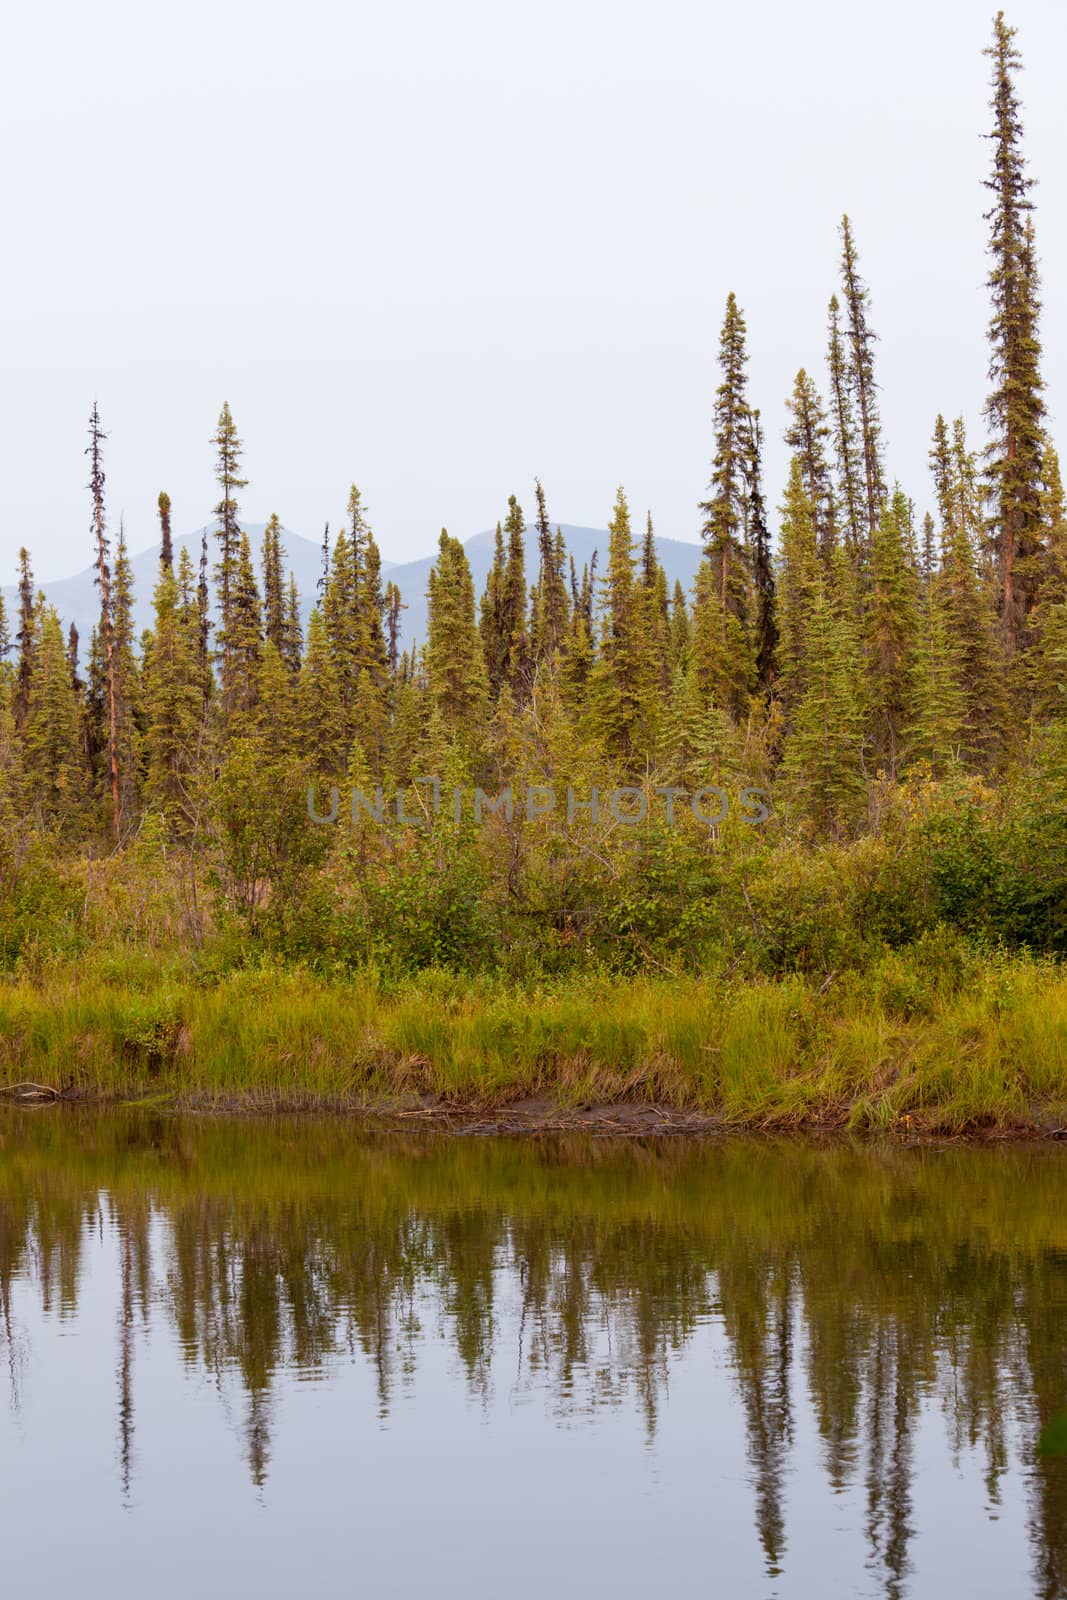 Boreal forest taiga at river bank of McQuesten River, central Yukon Territory, Canada, near town of Mayo forming a beautiful northern riverscape.